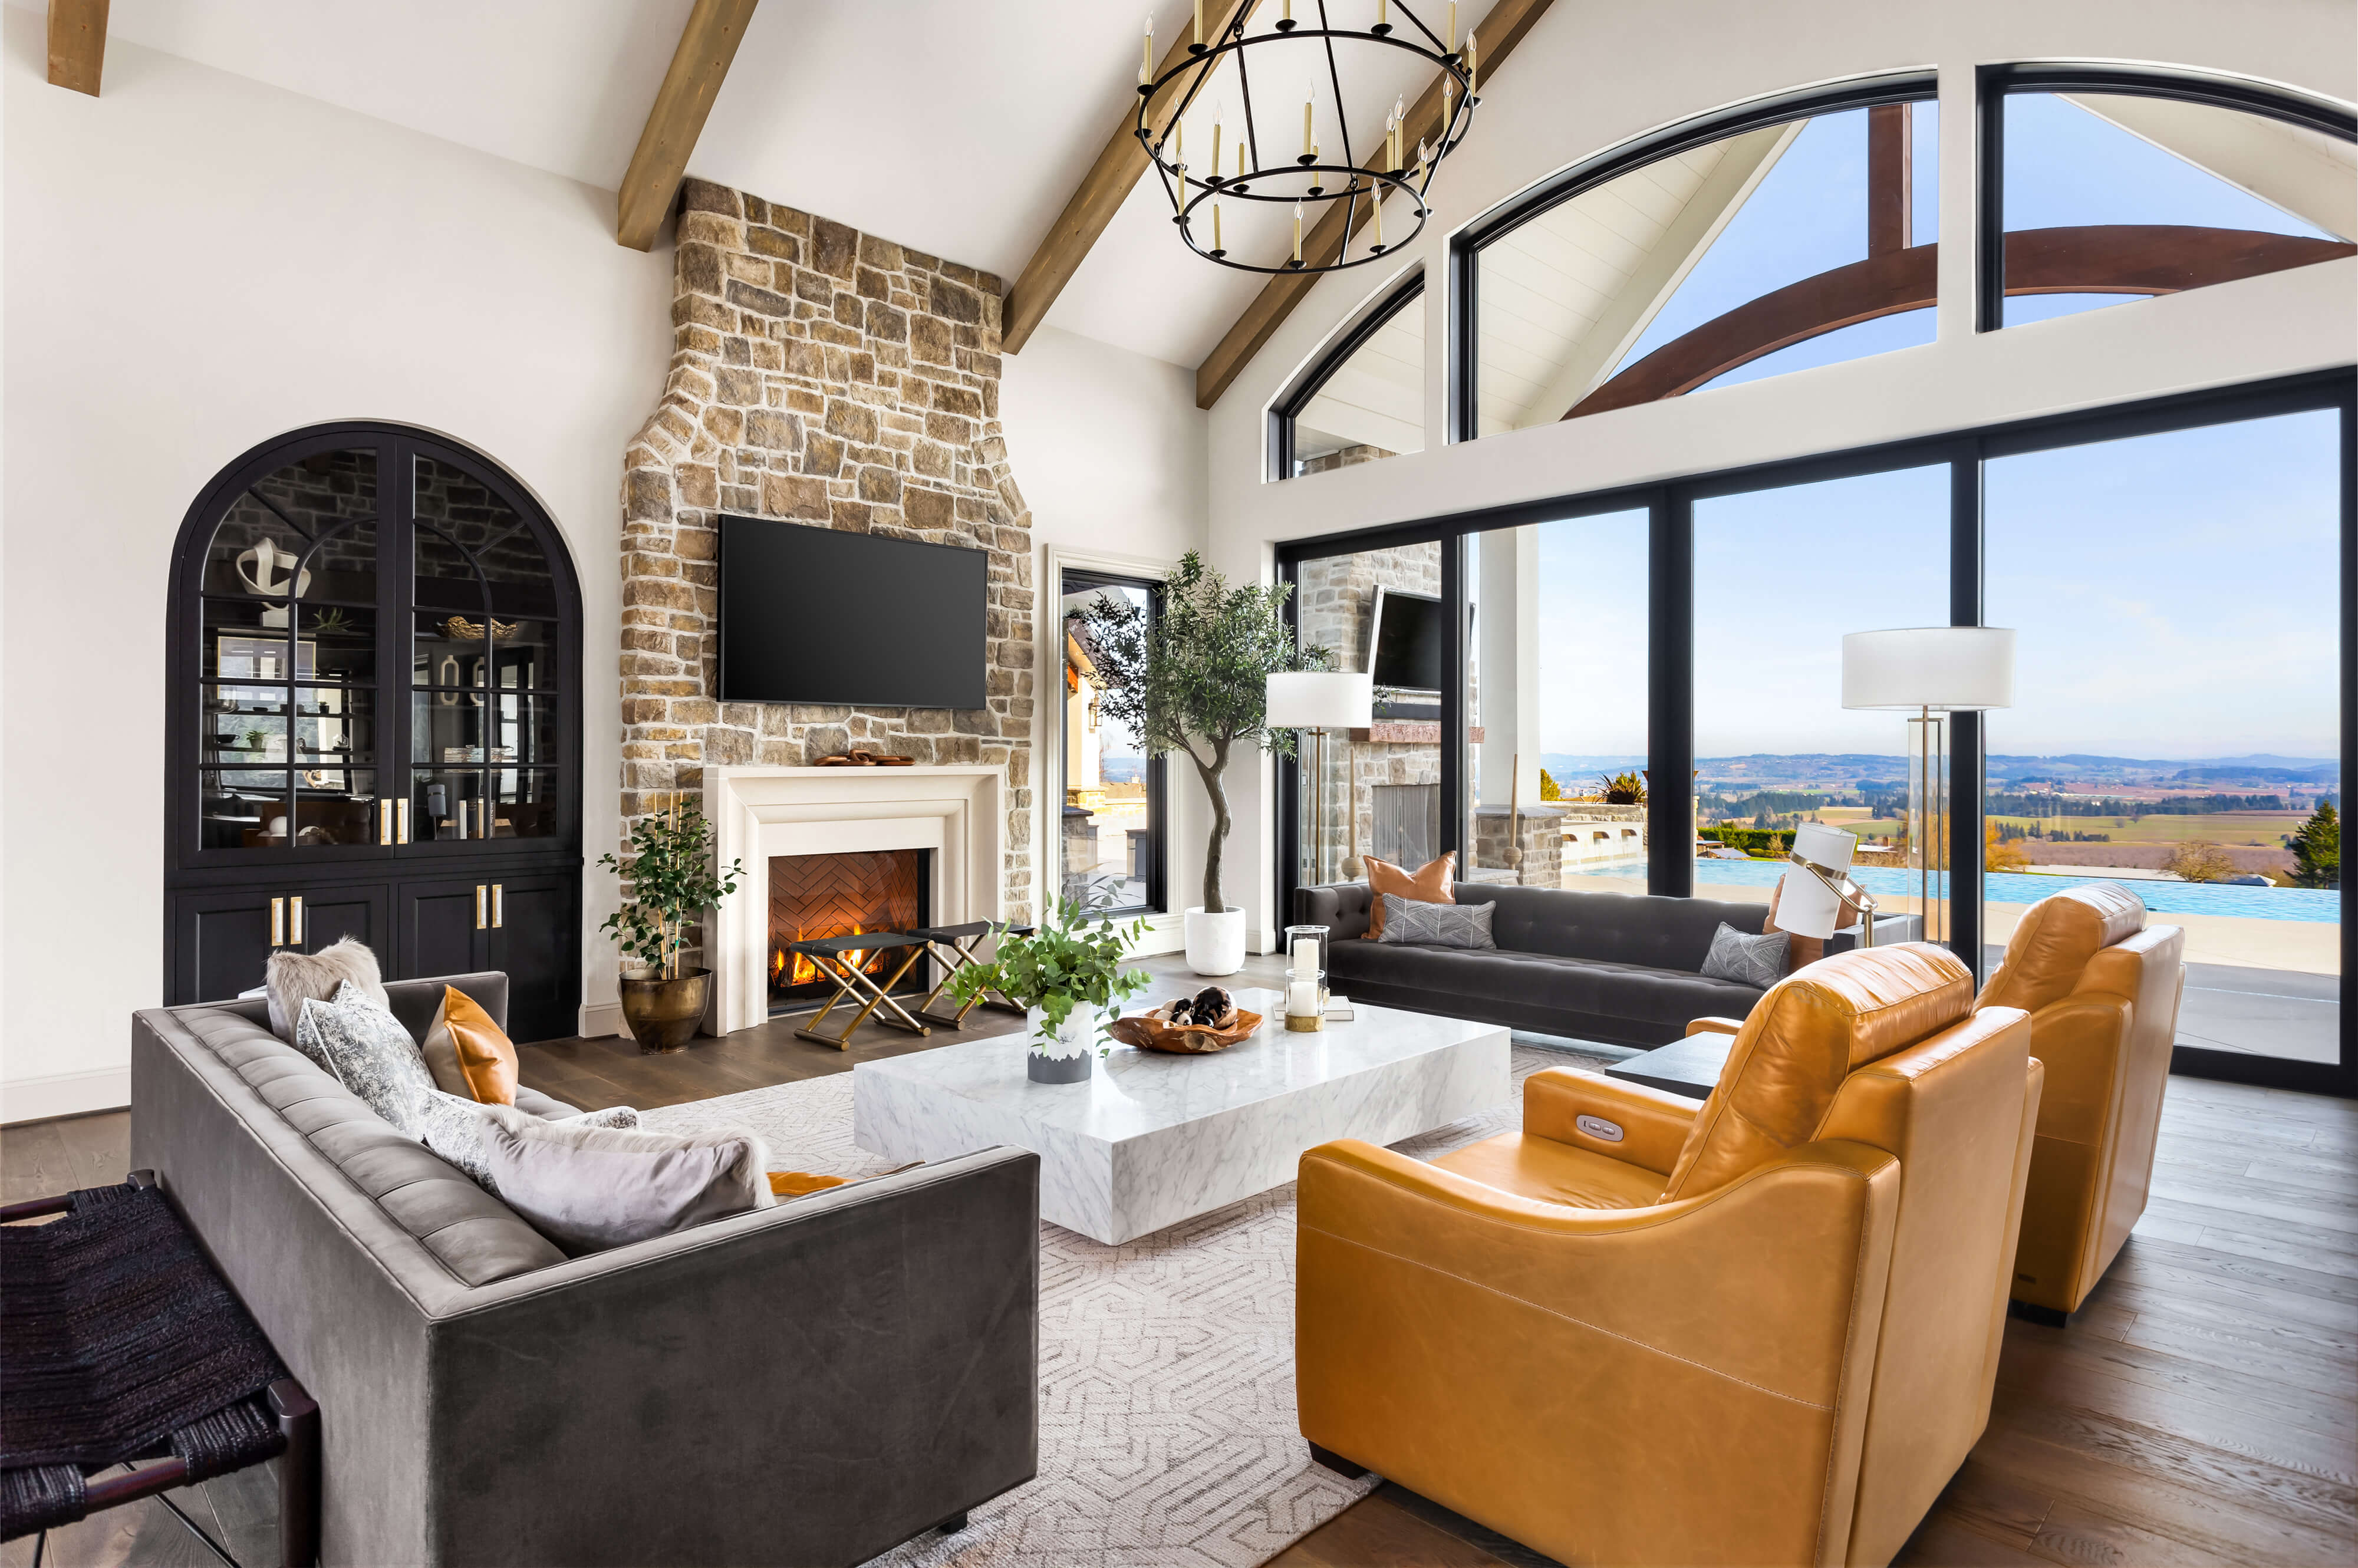 Beautiful living room in new modern  luxury home. Features vaulted ceilings, fireplace with roaring fire, and gorgeous exterior view with infinity pool and valley